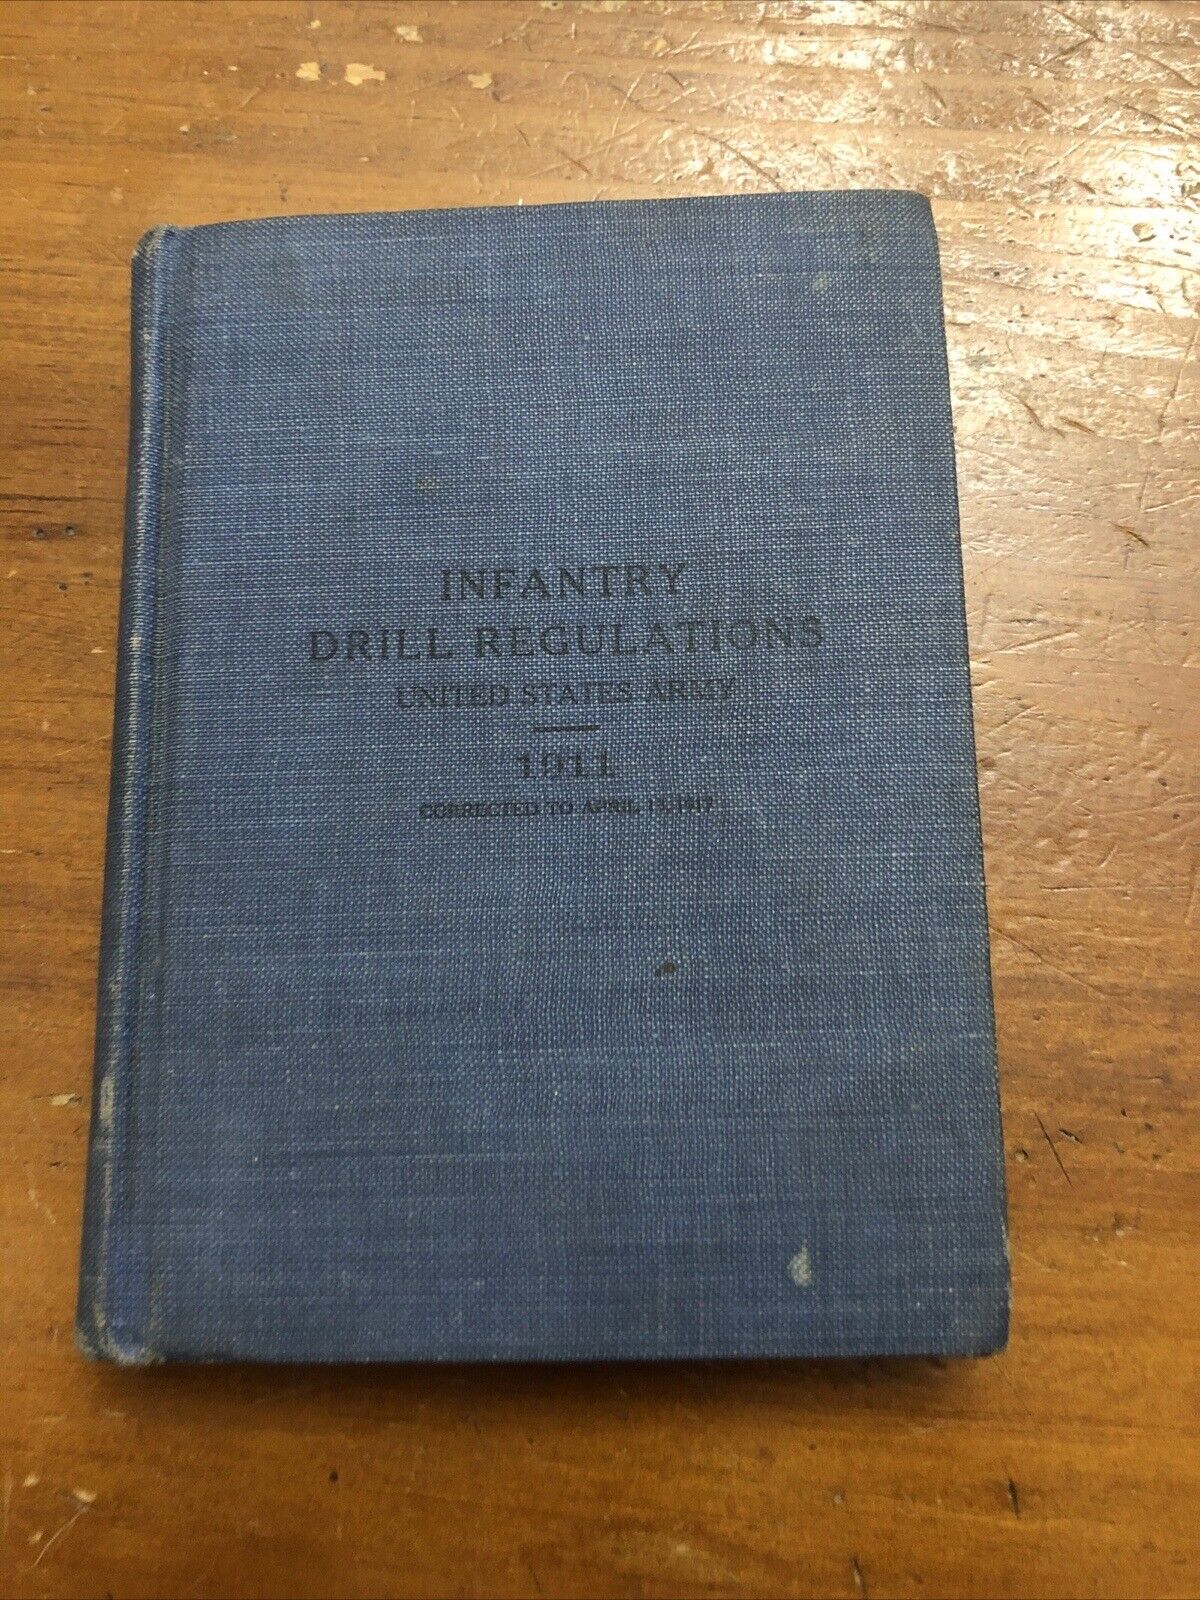 Infantry Drill Regulations 1911 WWI Army Guide Book 1917 Doughboy 